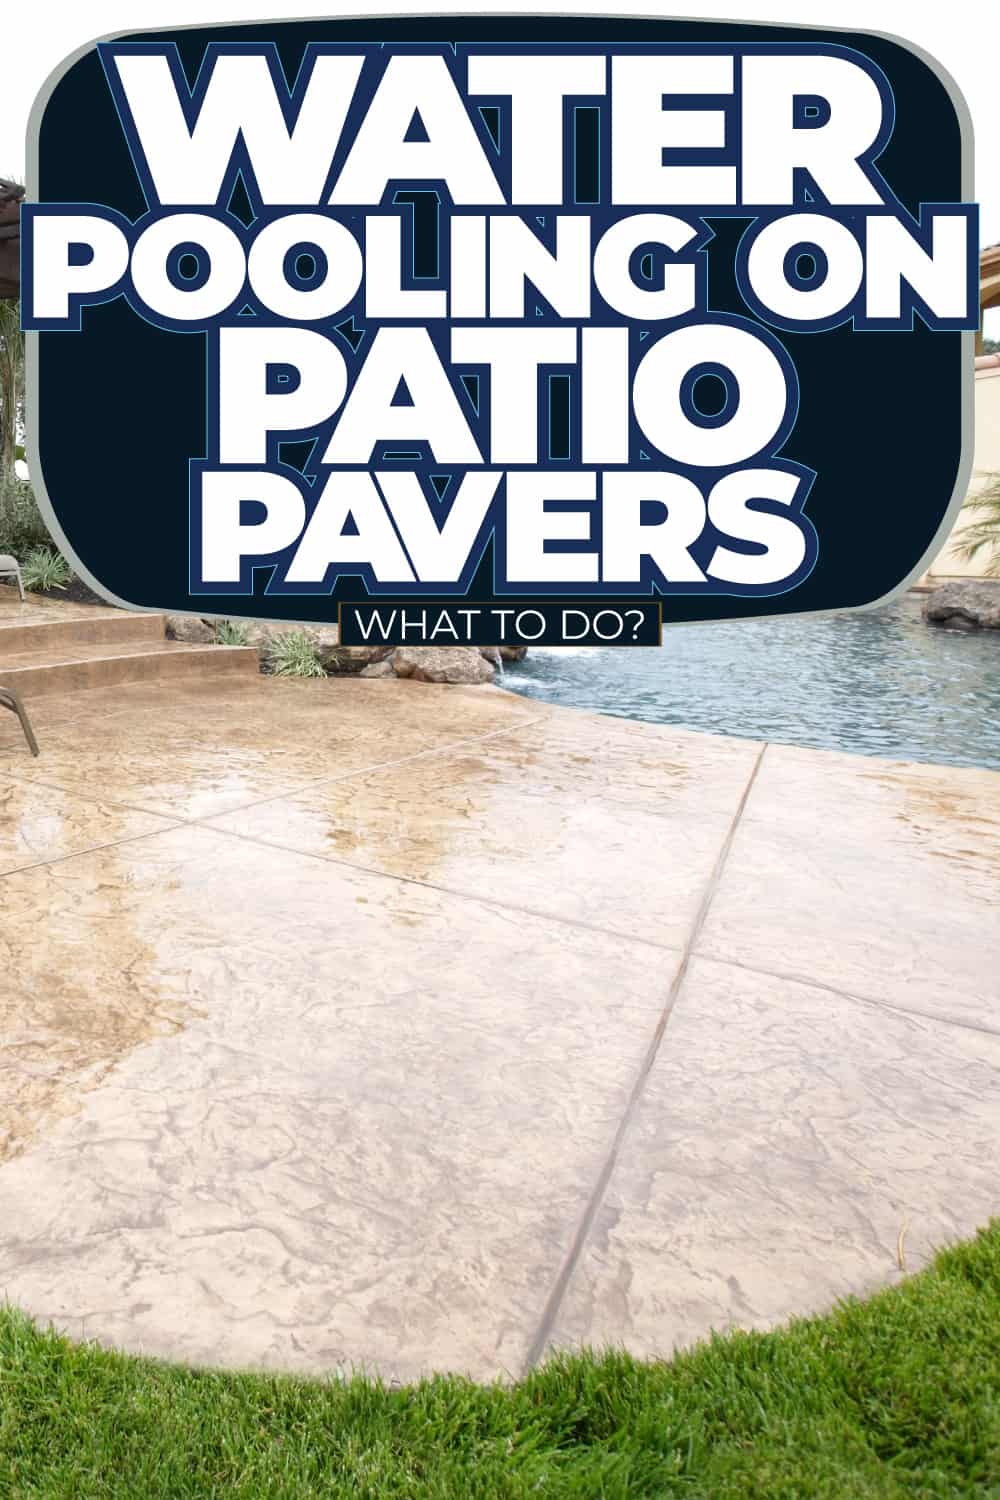 Water Pooling On Patio Pavers - What To Do?